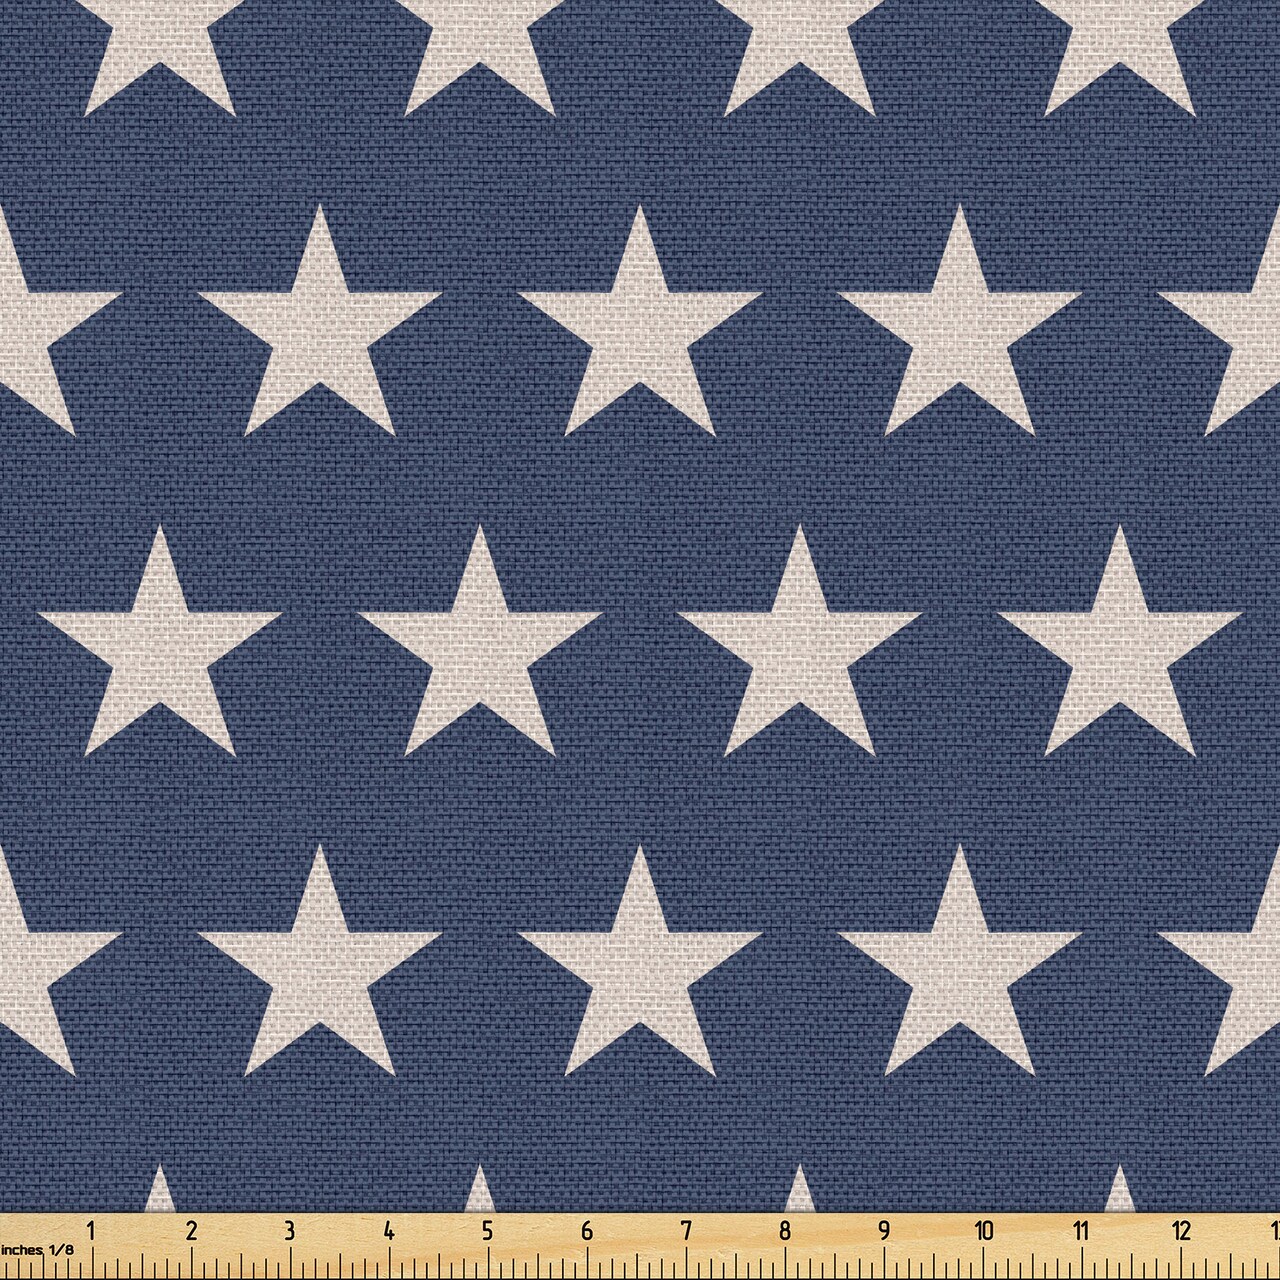 Ambesonne Star Fabric by the Yard, Patriotic Star of the American Flag Independence Themed Freedom Concept USA, Decorative Fabric for Upholstery and Home Accents, 1 Yard, Violet Blue and Tan